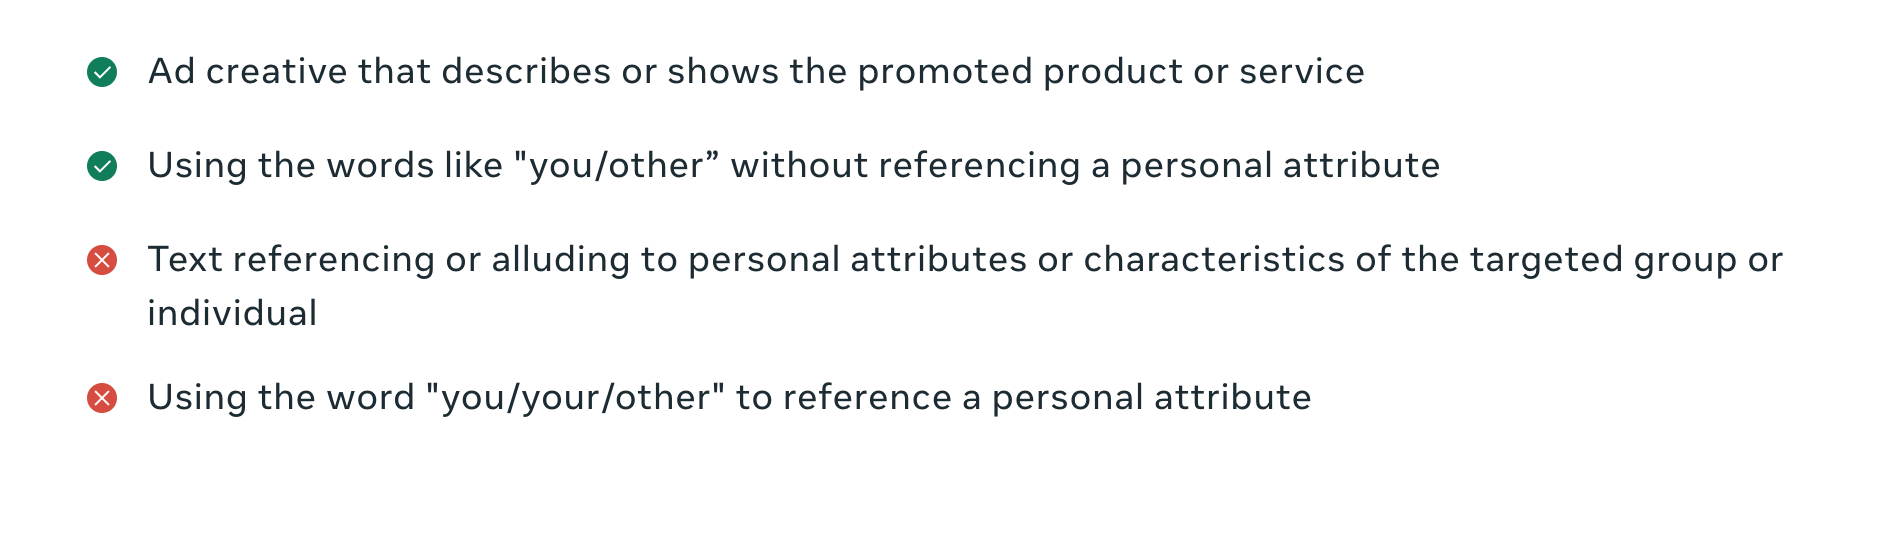 facebook-ad-rejected-personal-attributes-policy